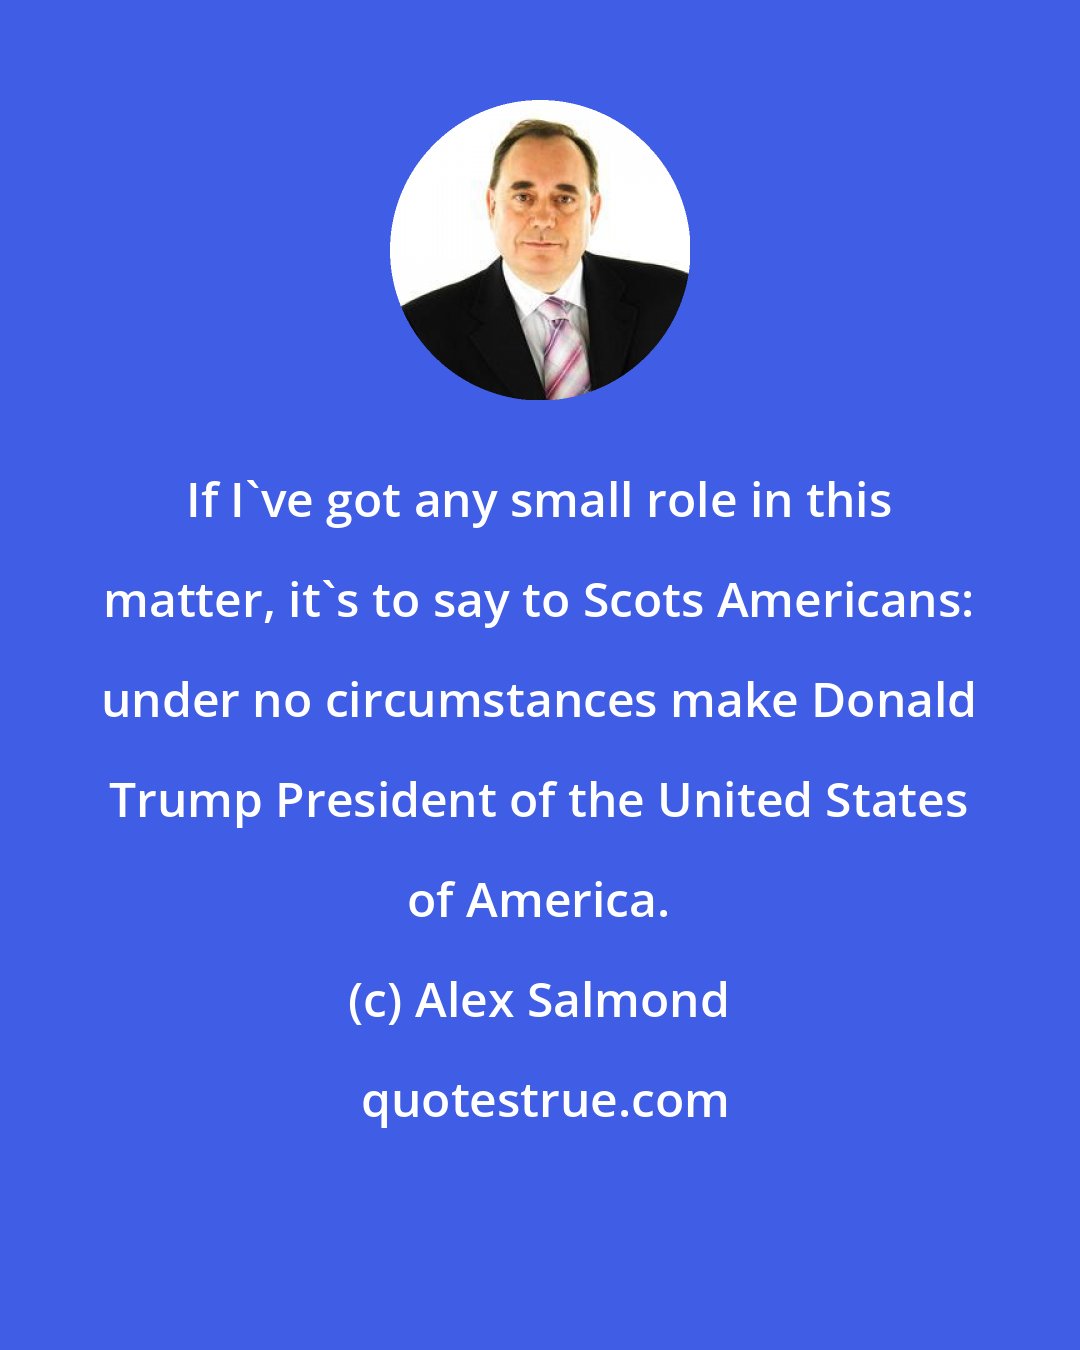 Alex Salmond: If I've got any small role in this matter, it's to say to Scots Americans: under no circumstances make Donald Trump President of the United States of America.